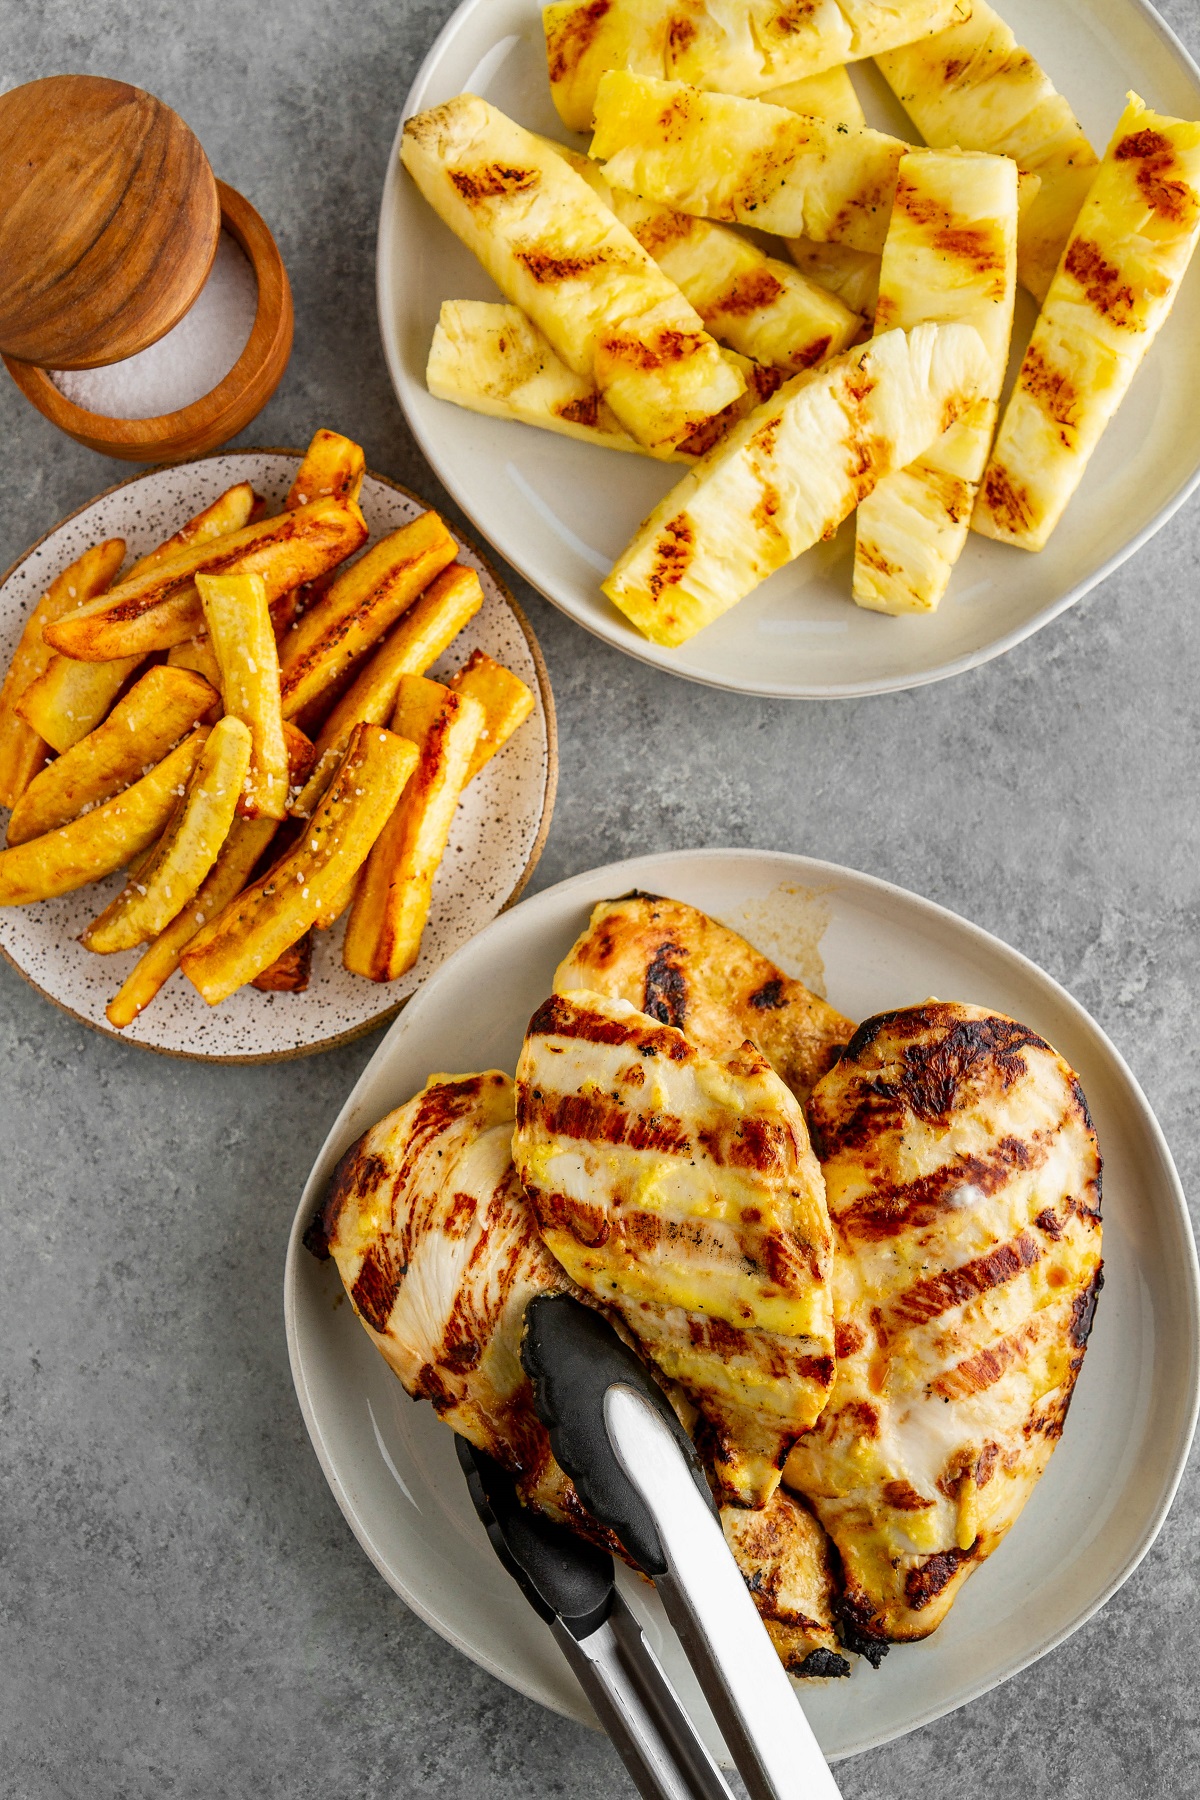 Grilled chicken and grilled pineapple on plates and a plate to the side of fried plantains.